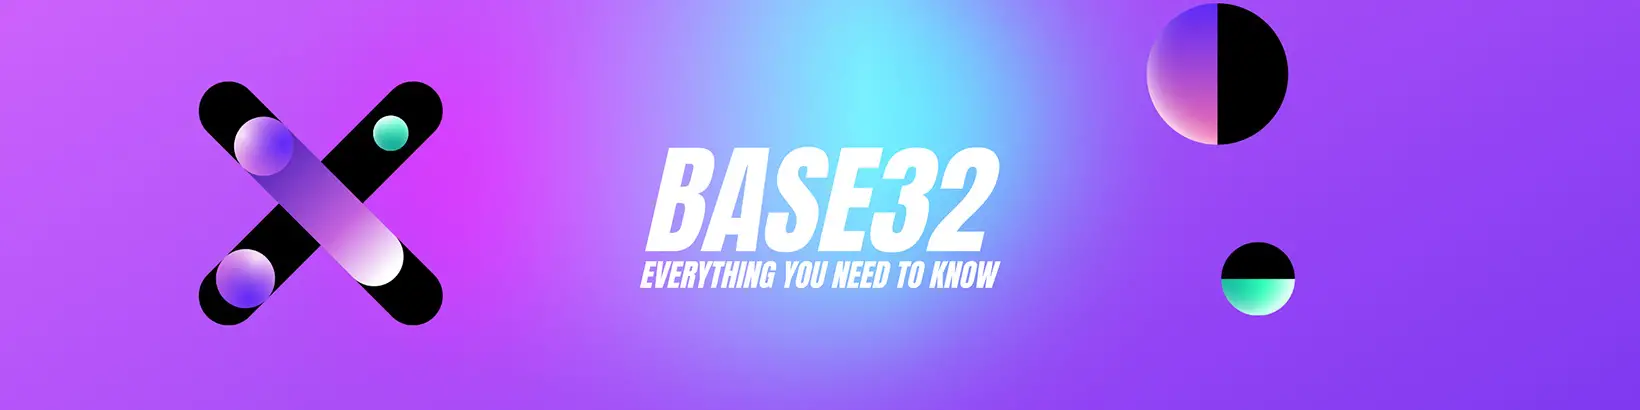 In this article, we will go over Base32 encoding in detail, focusing on its unique characteristics in data manipulation. We will look at its character set, provide a reference table, and look at various character groups. In addition, we’ll look at the differences introduced by Z-Base32, talk about case sensitivity, and show how regular expressions can be used to detect Base32. Join us on this educational journey as we explore the complexities of Base32 encoding and its applications.